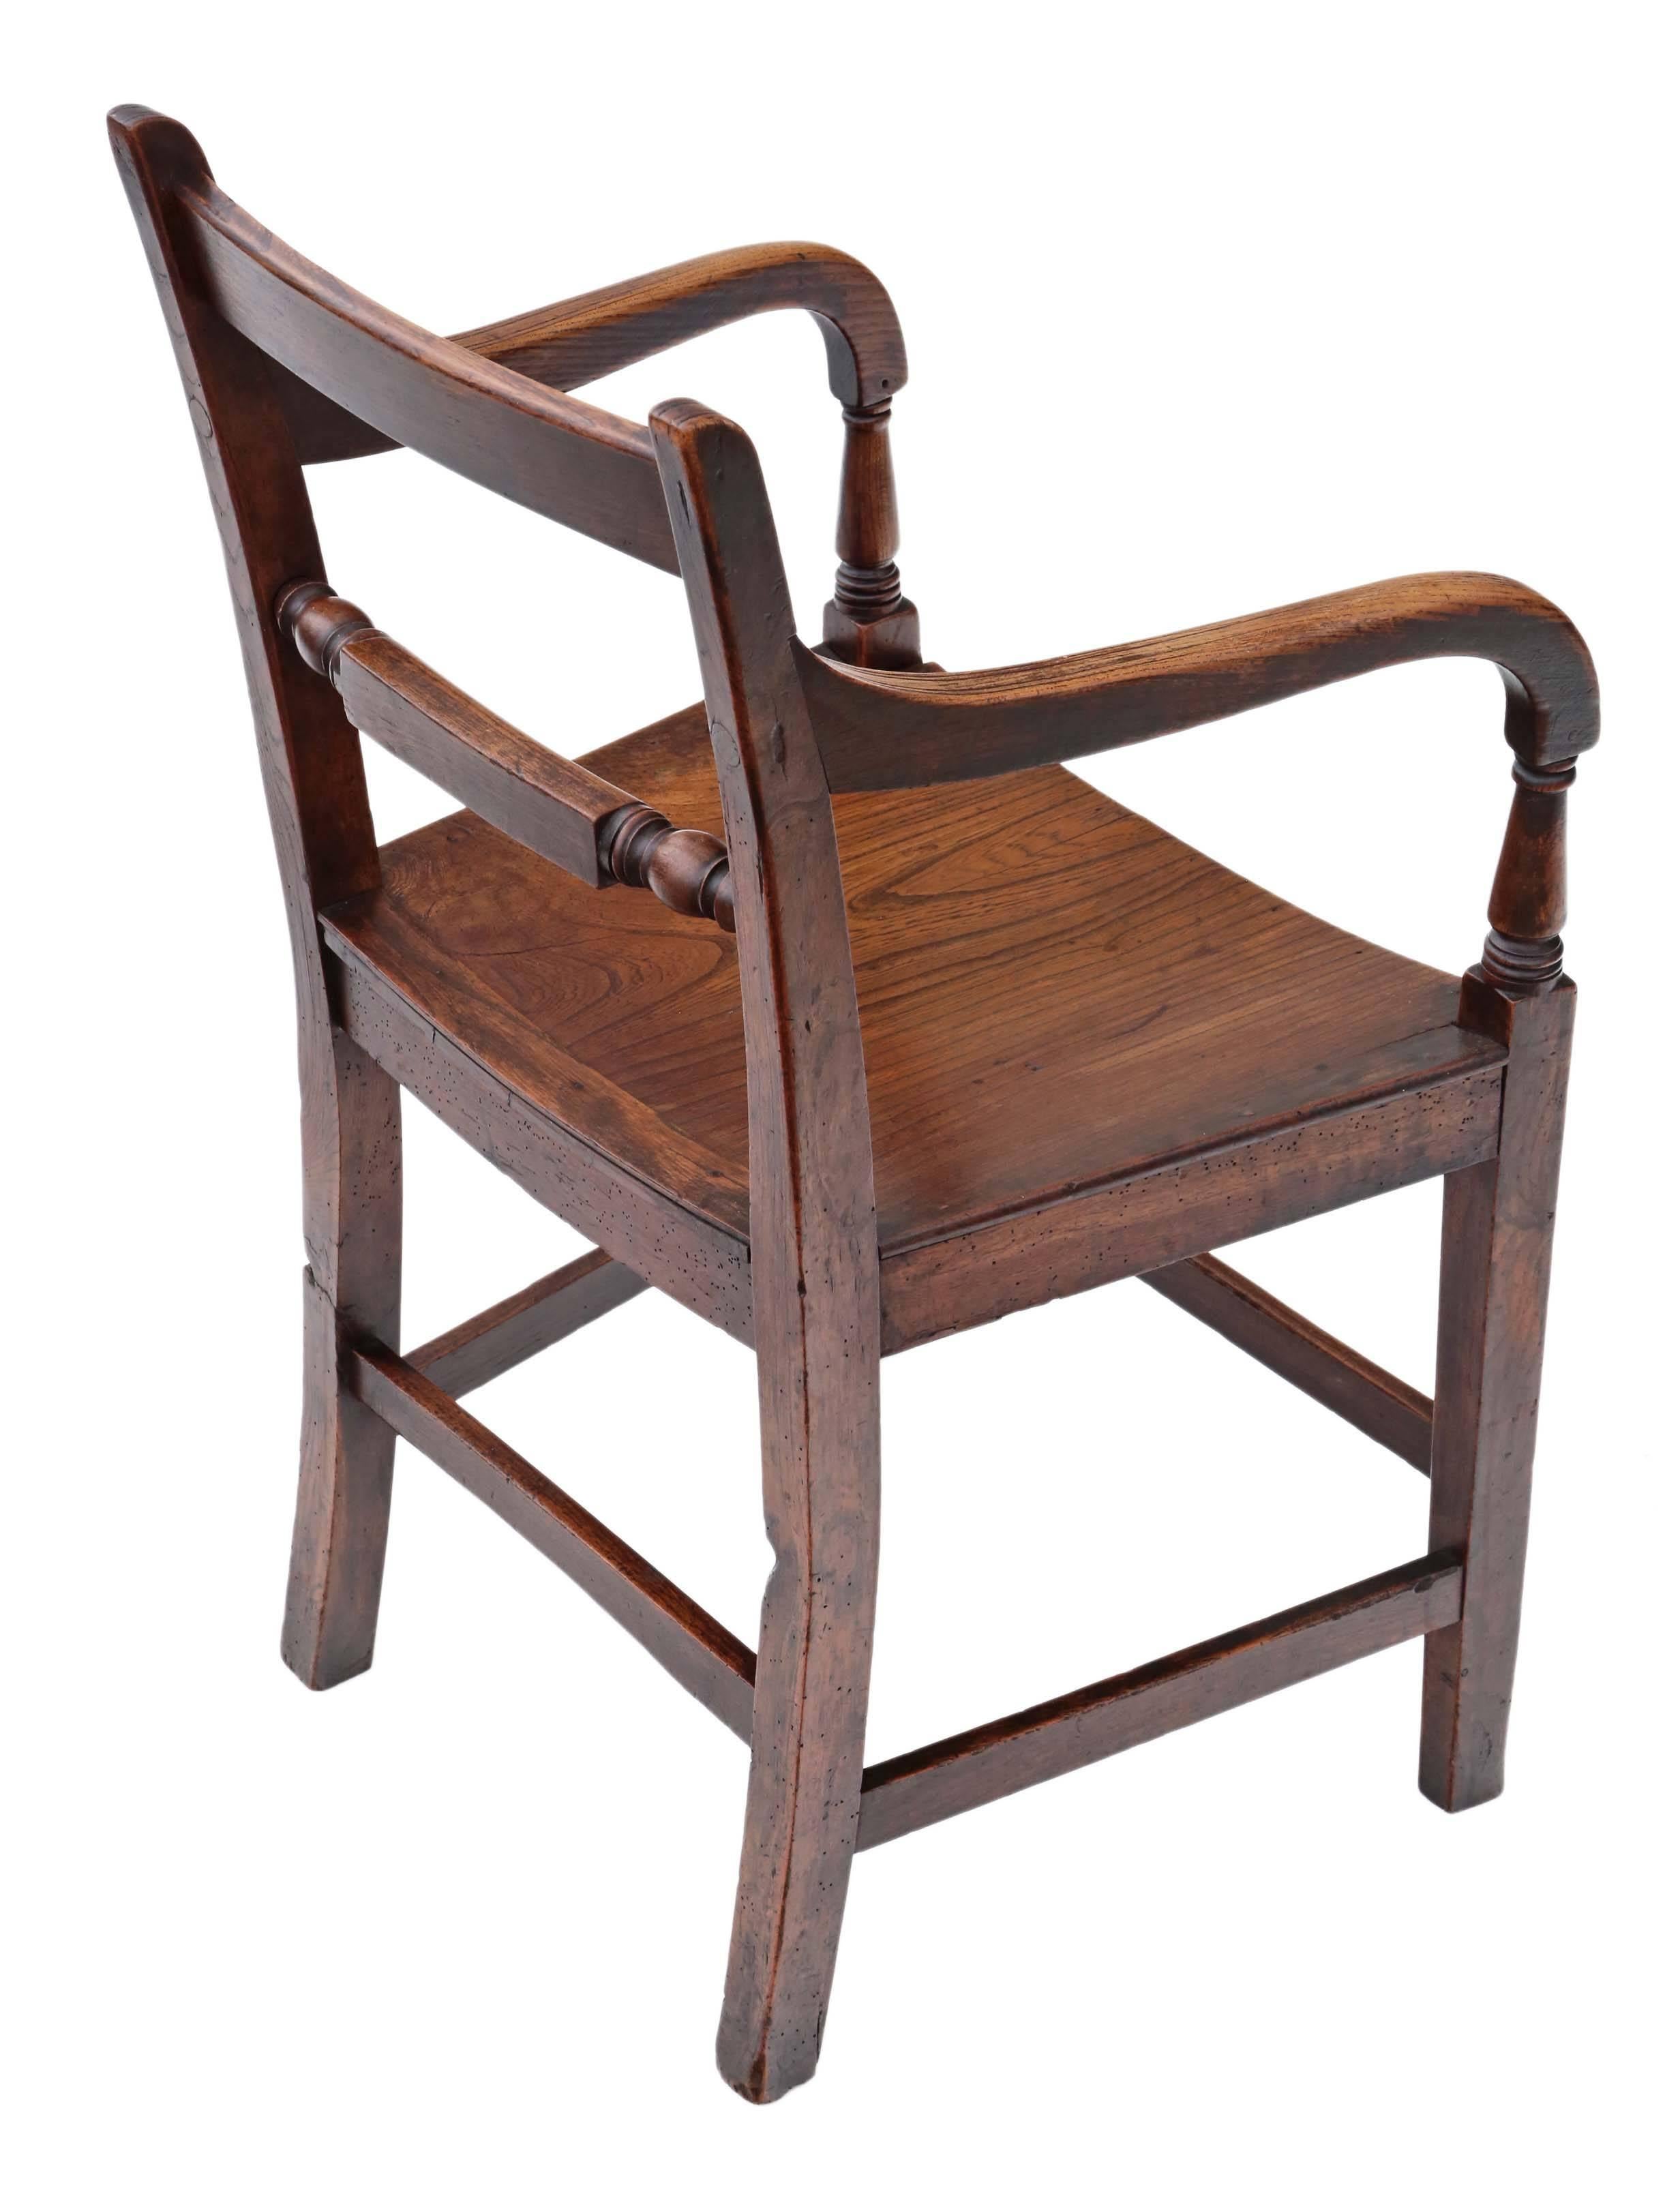 Antique Quality Georgian circa 1800 Elm Elbow Desk Chair In Good Condition For Sale In Wisbech, Walton Wisbech